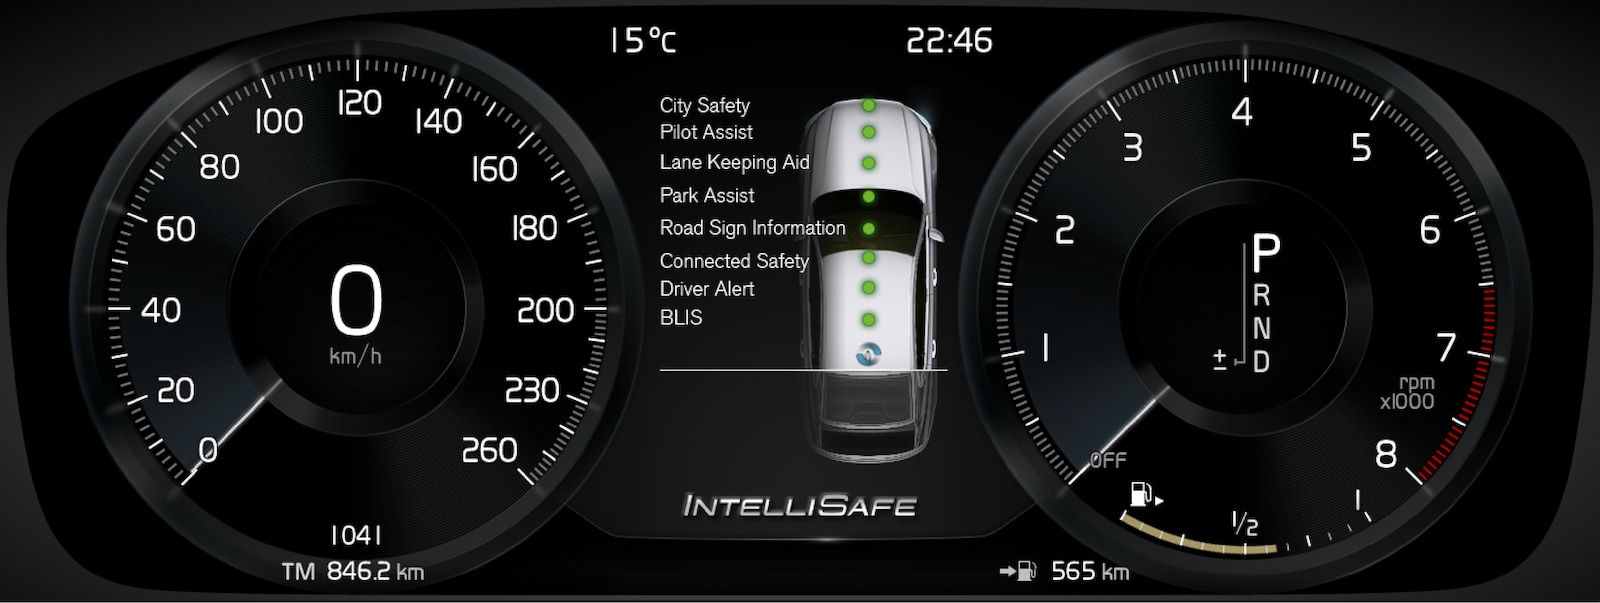 IntelliSafe safety check when starting